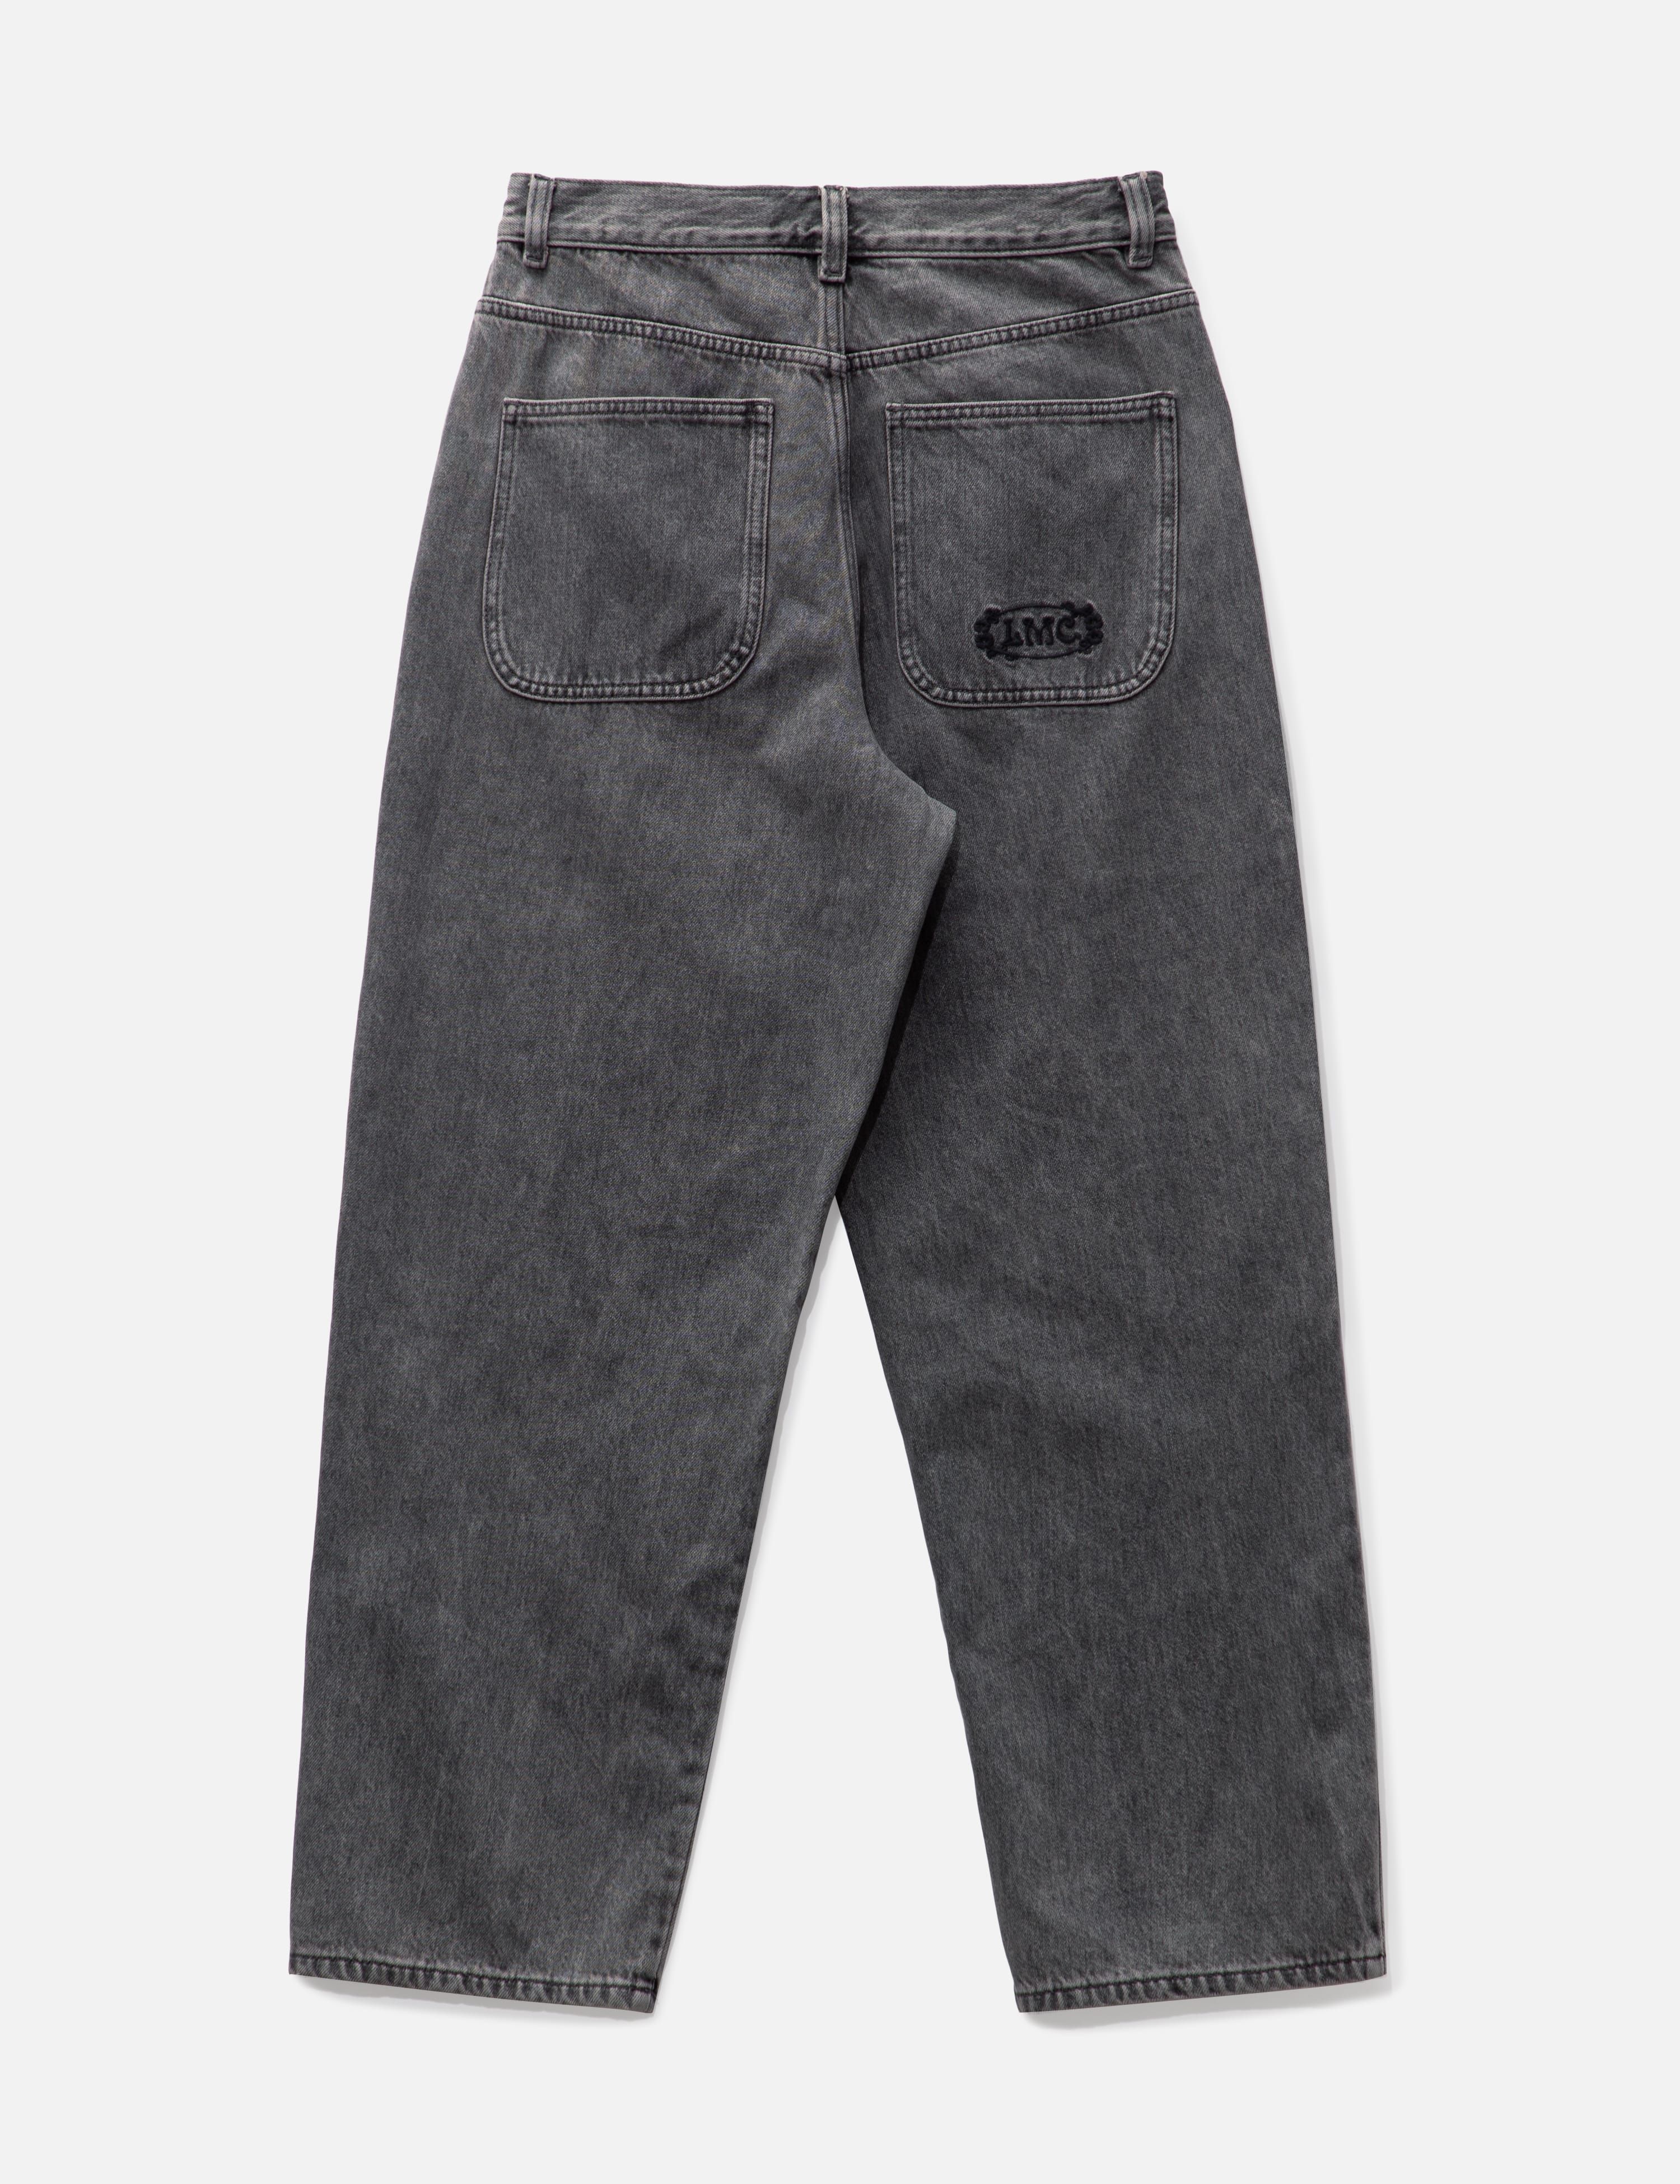 LMC - DOUBLE KNEE DENIM PANTS | HBX - Globally Curated Fashion and 